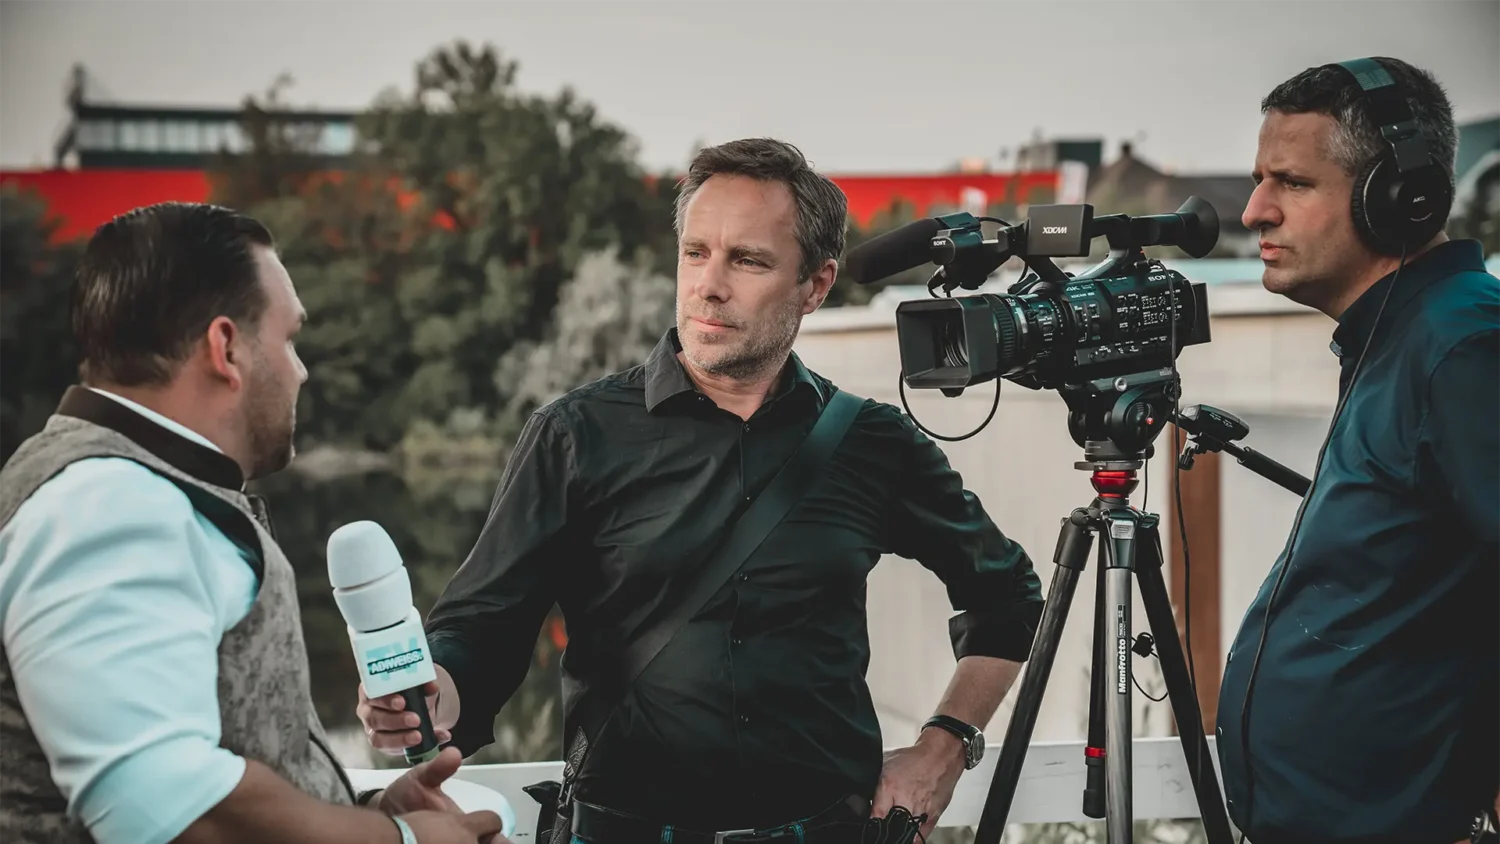 Newscaster and cinematographer interviewing a man outdoors